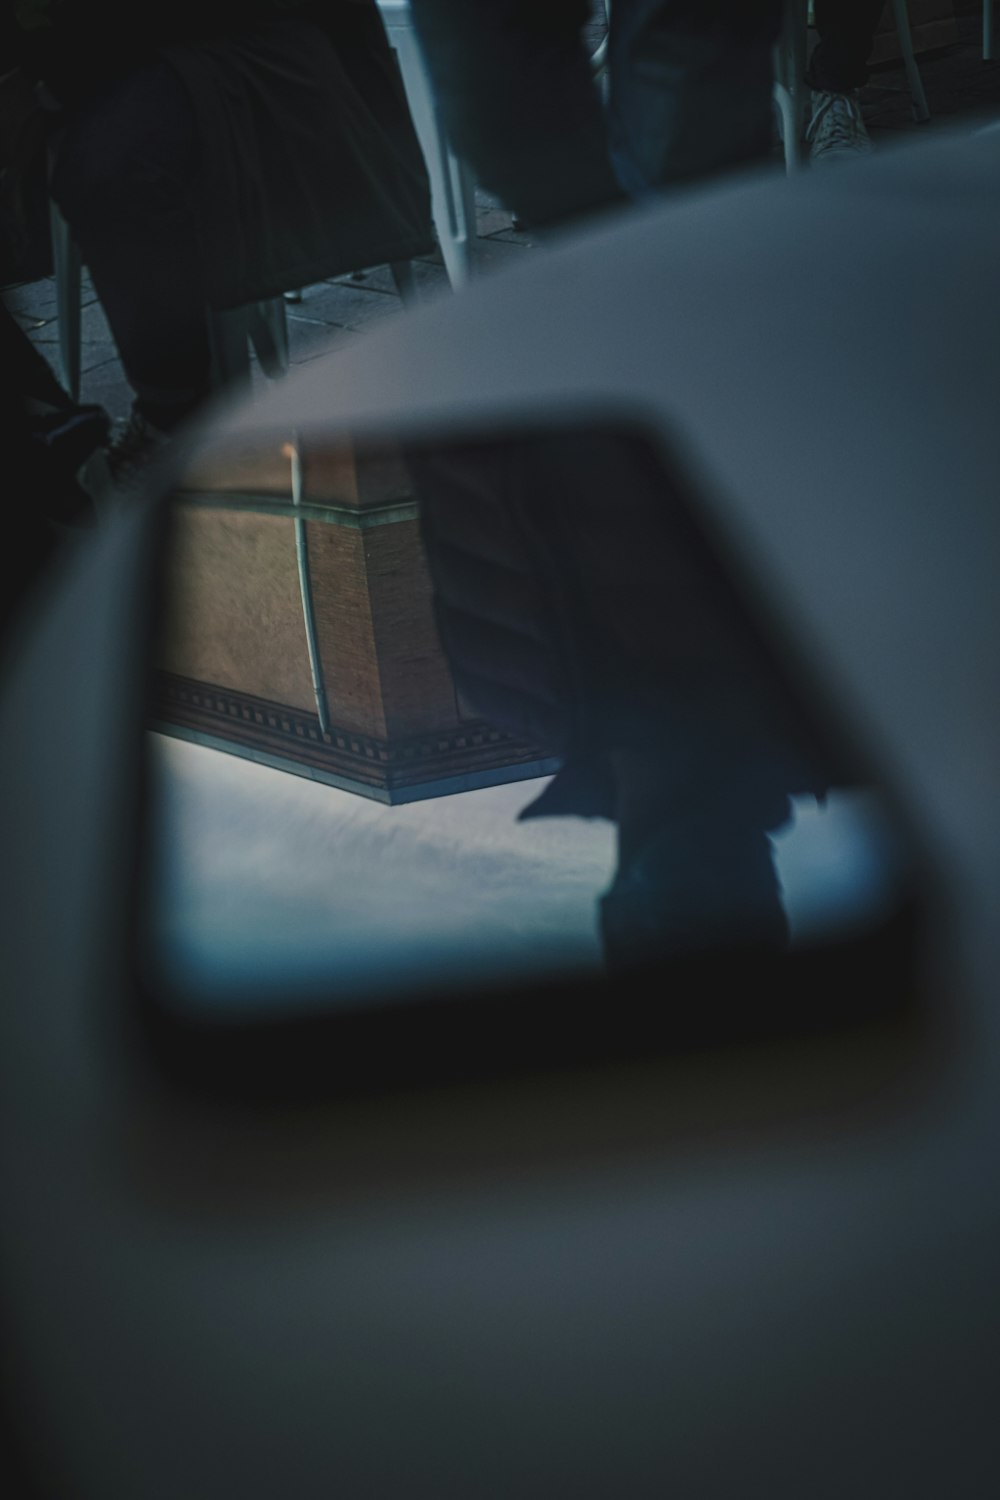 a reflection of a suitcase in a rear view mirror